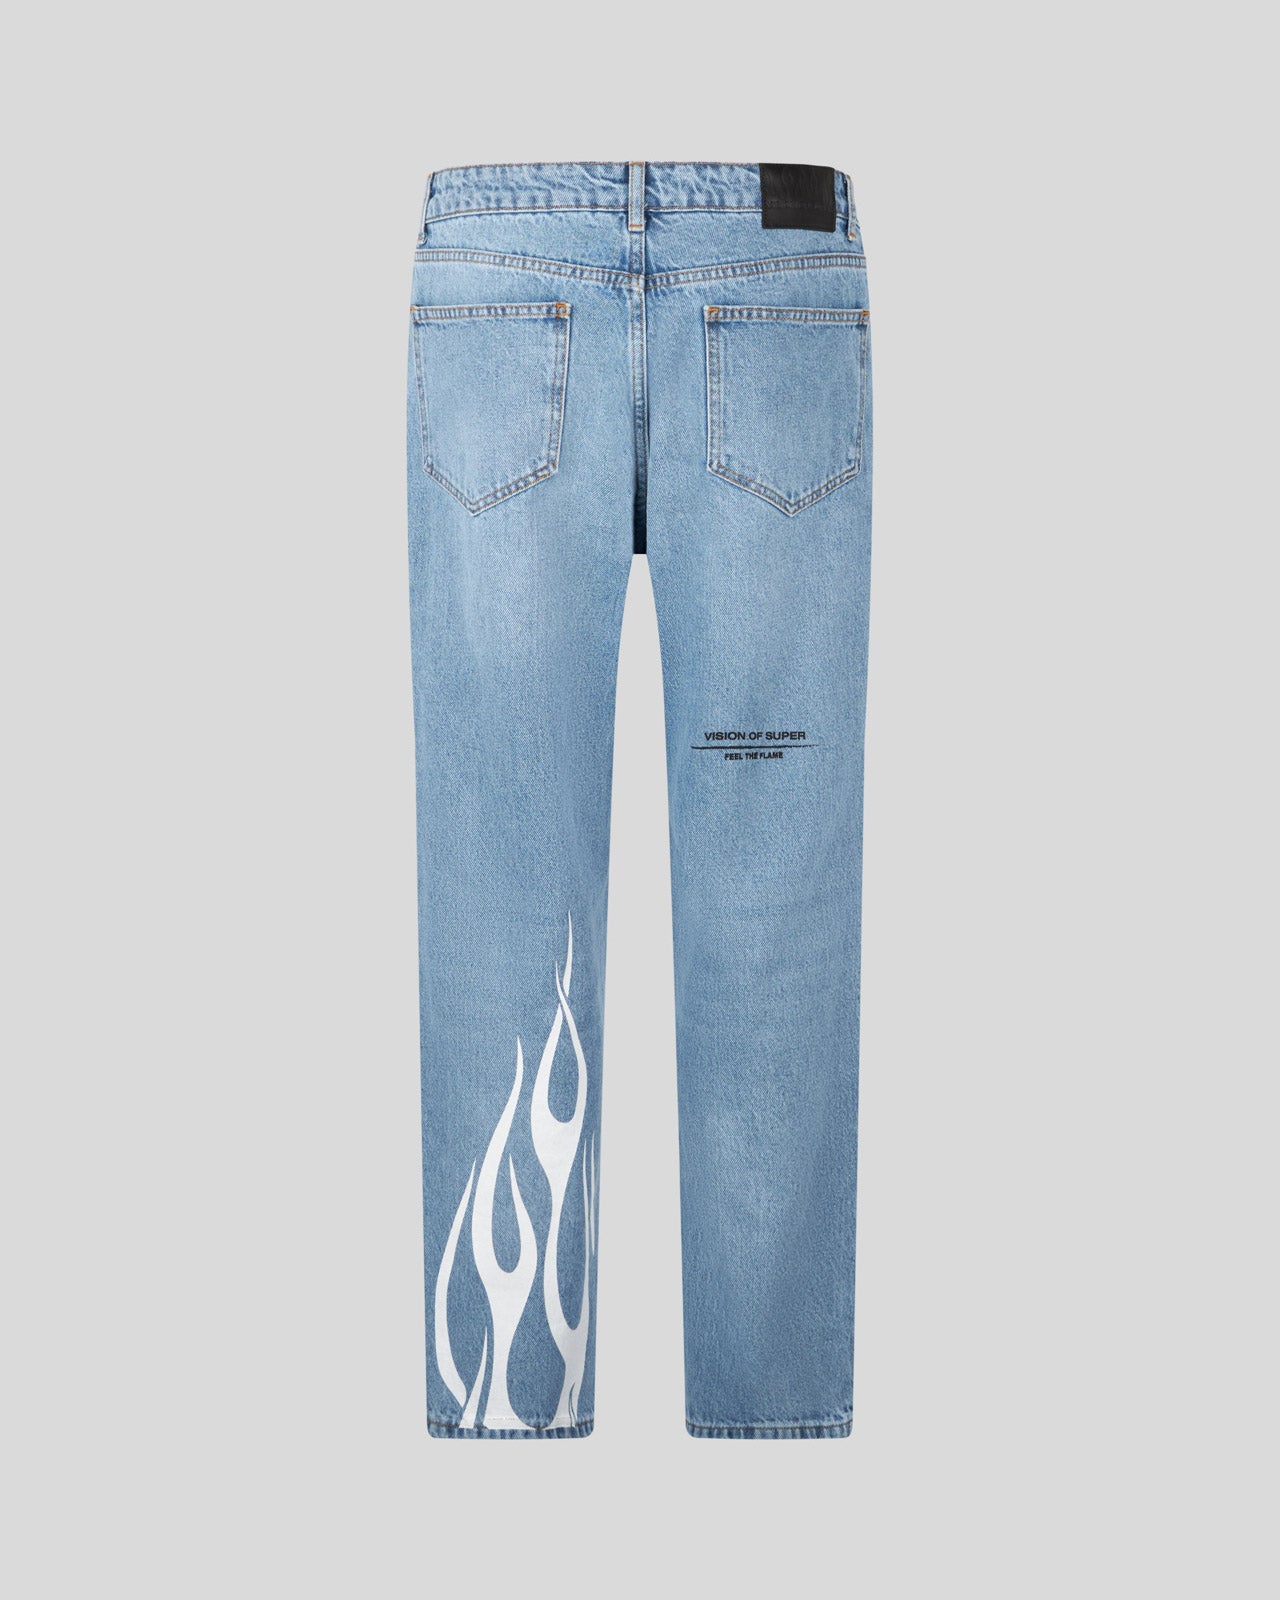 BLUE DENIM JEANS WITH PRINTED FLAMES AND LOGO